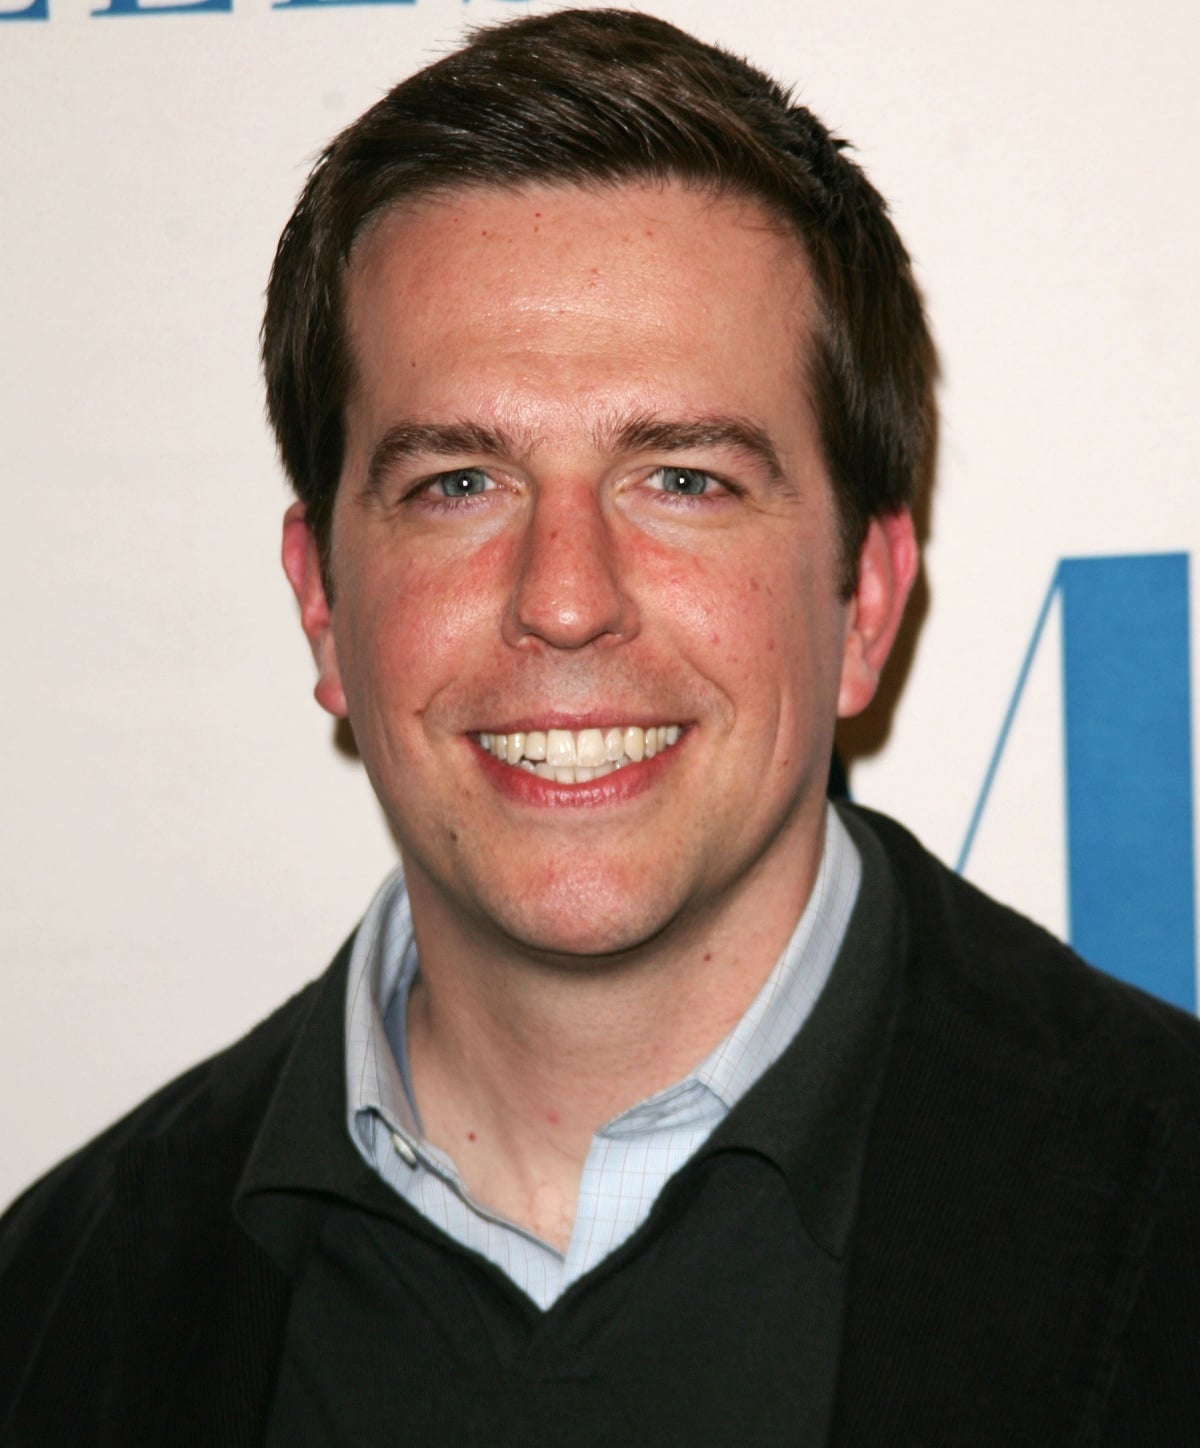 Ed Helms making an appearance at The Office panel during the 24th Paley Television Festival